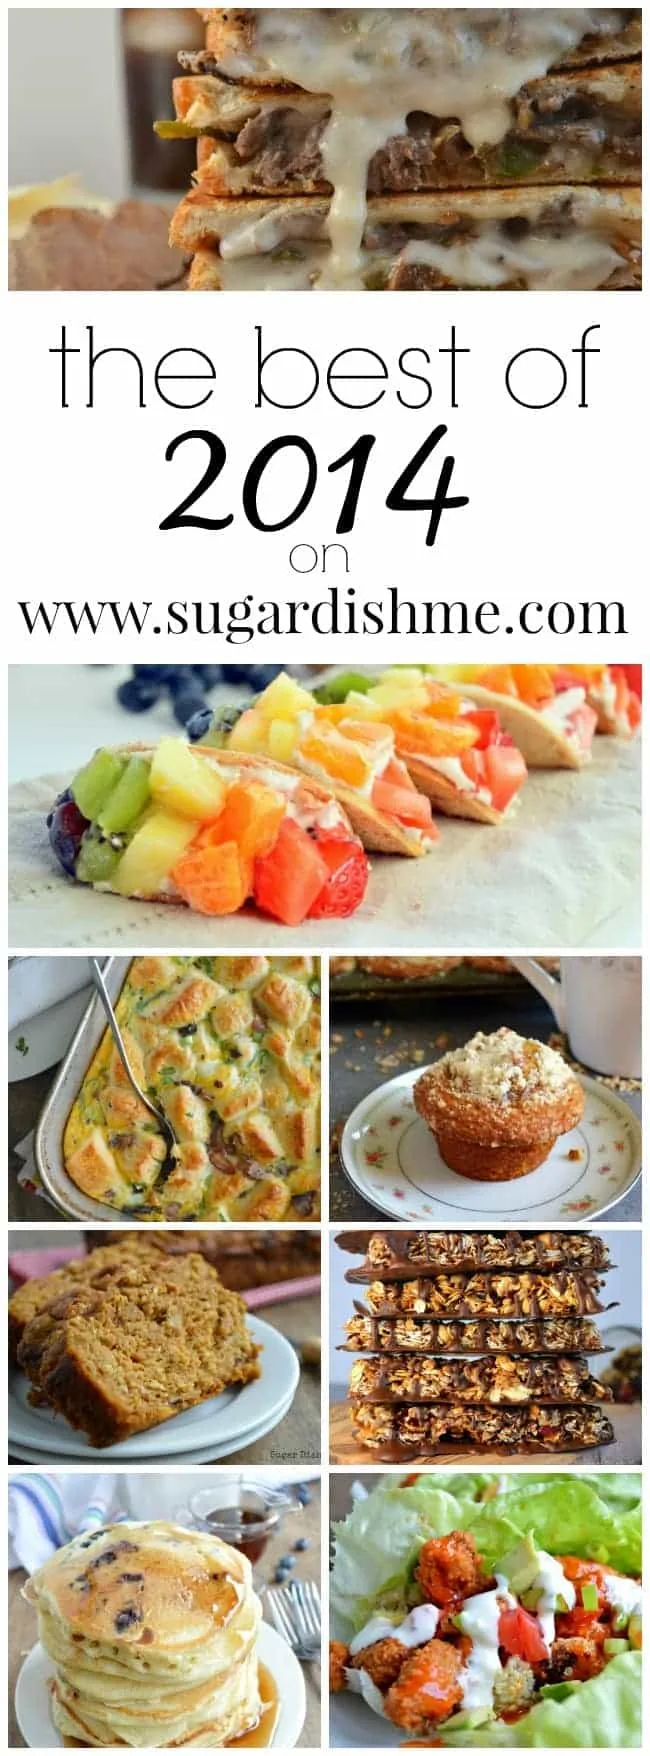 The Best of 2014 on www.sugardishme.com